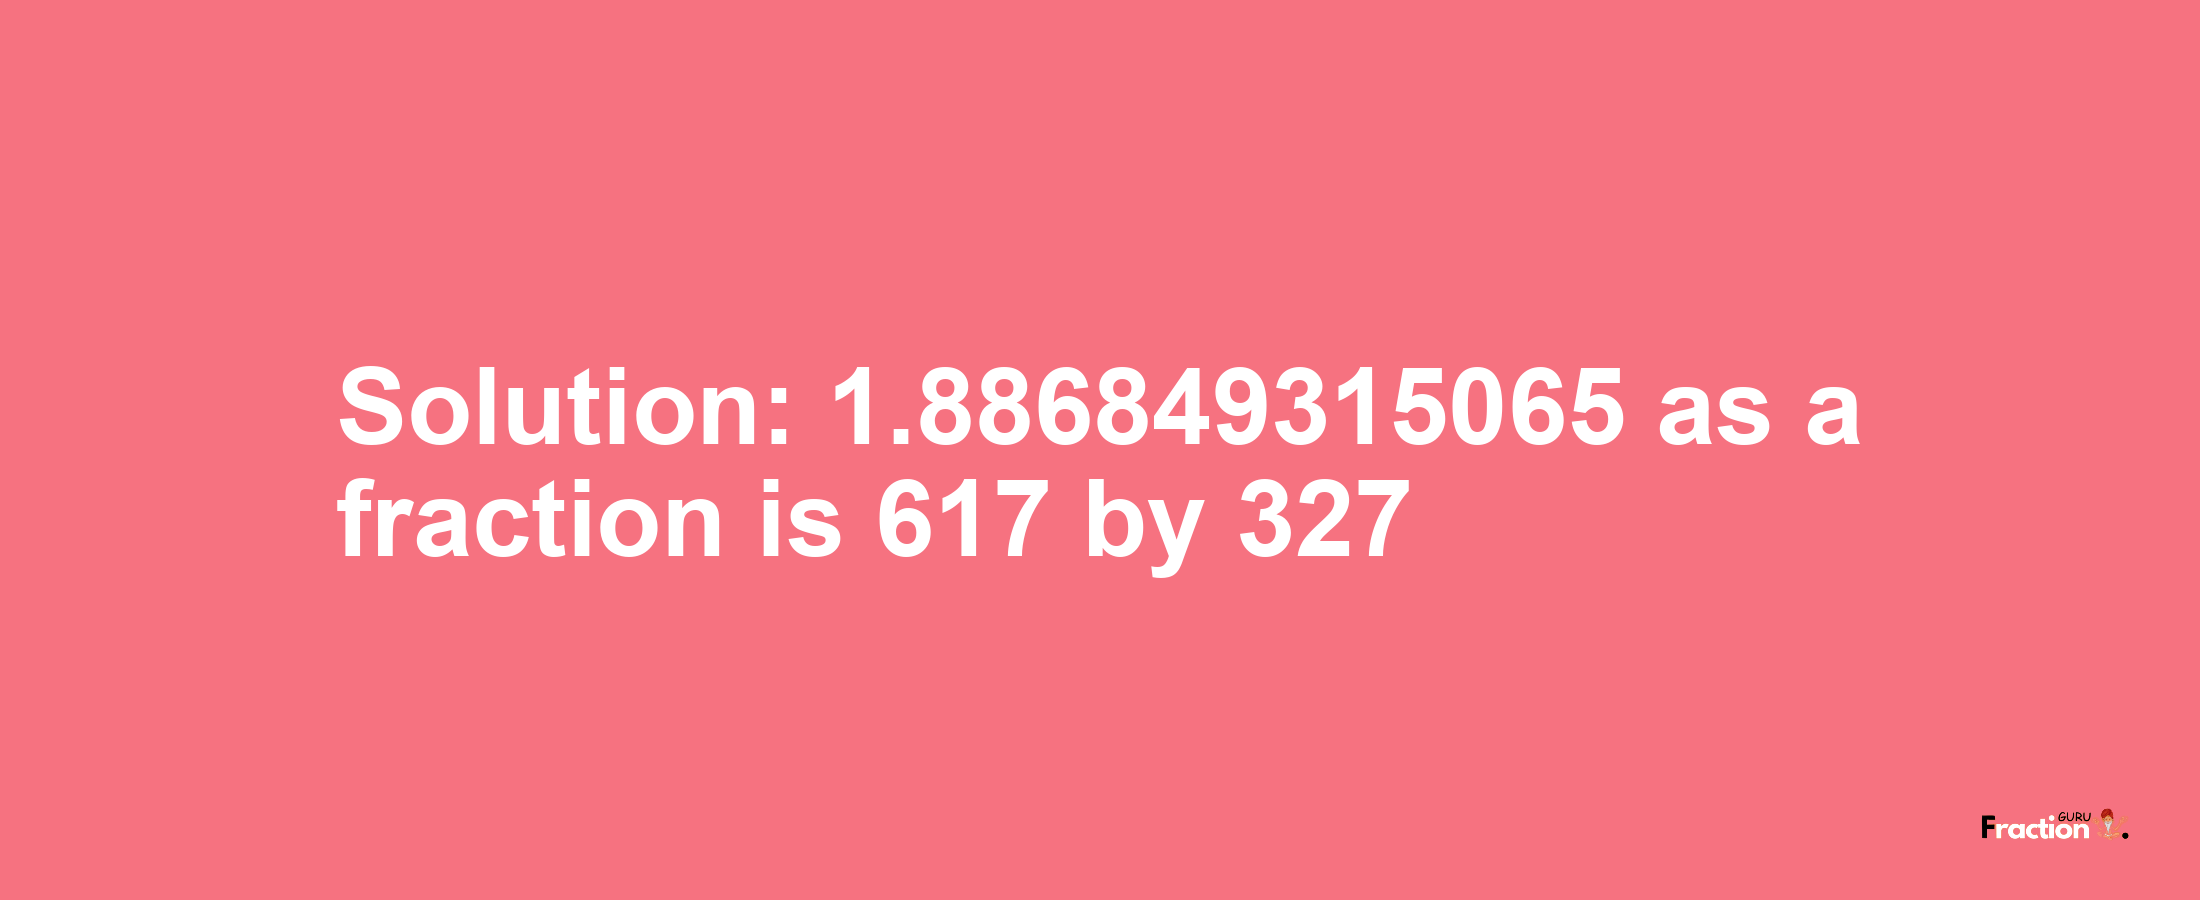 Solution:1.886849315065 as a fraction is 617/327